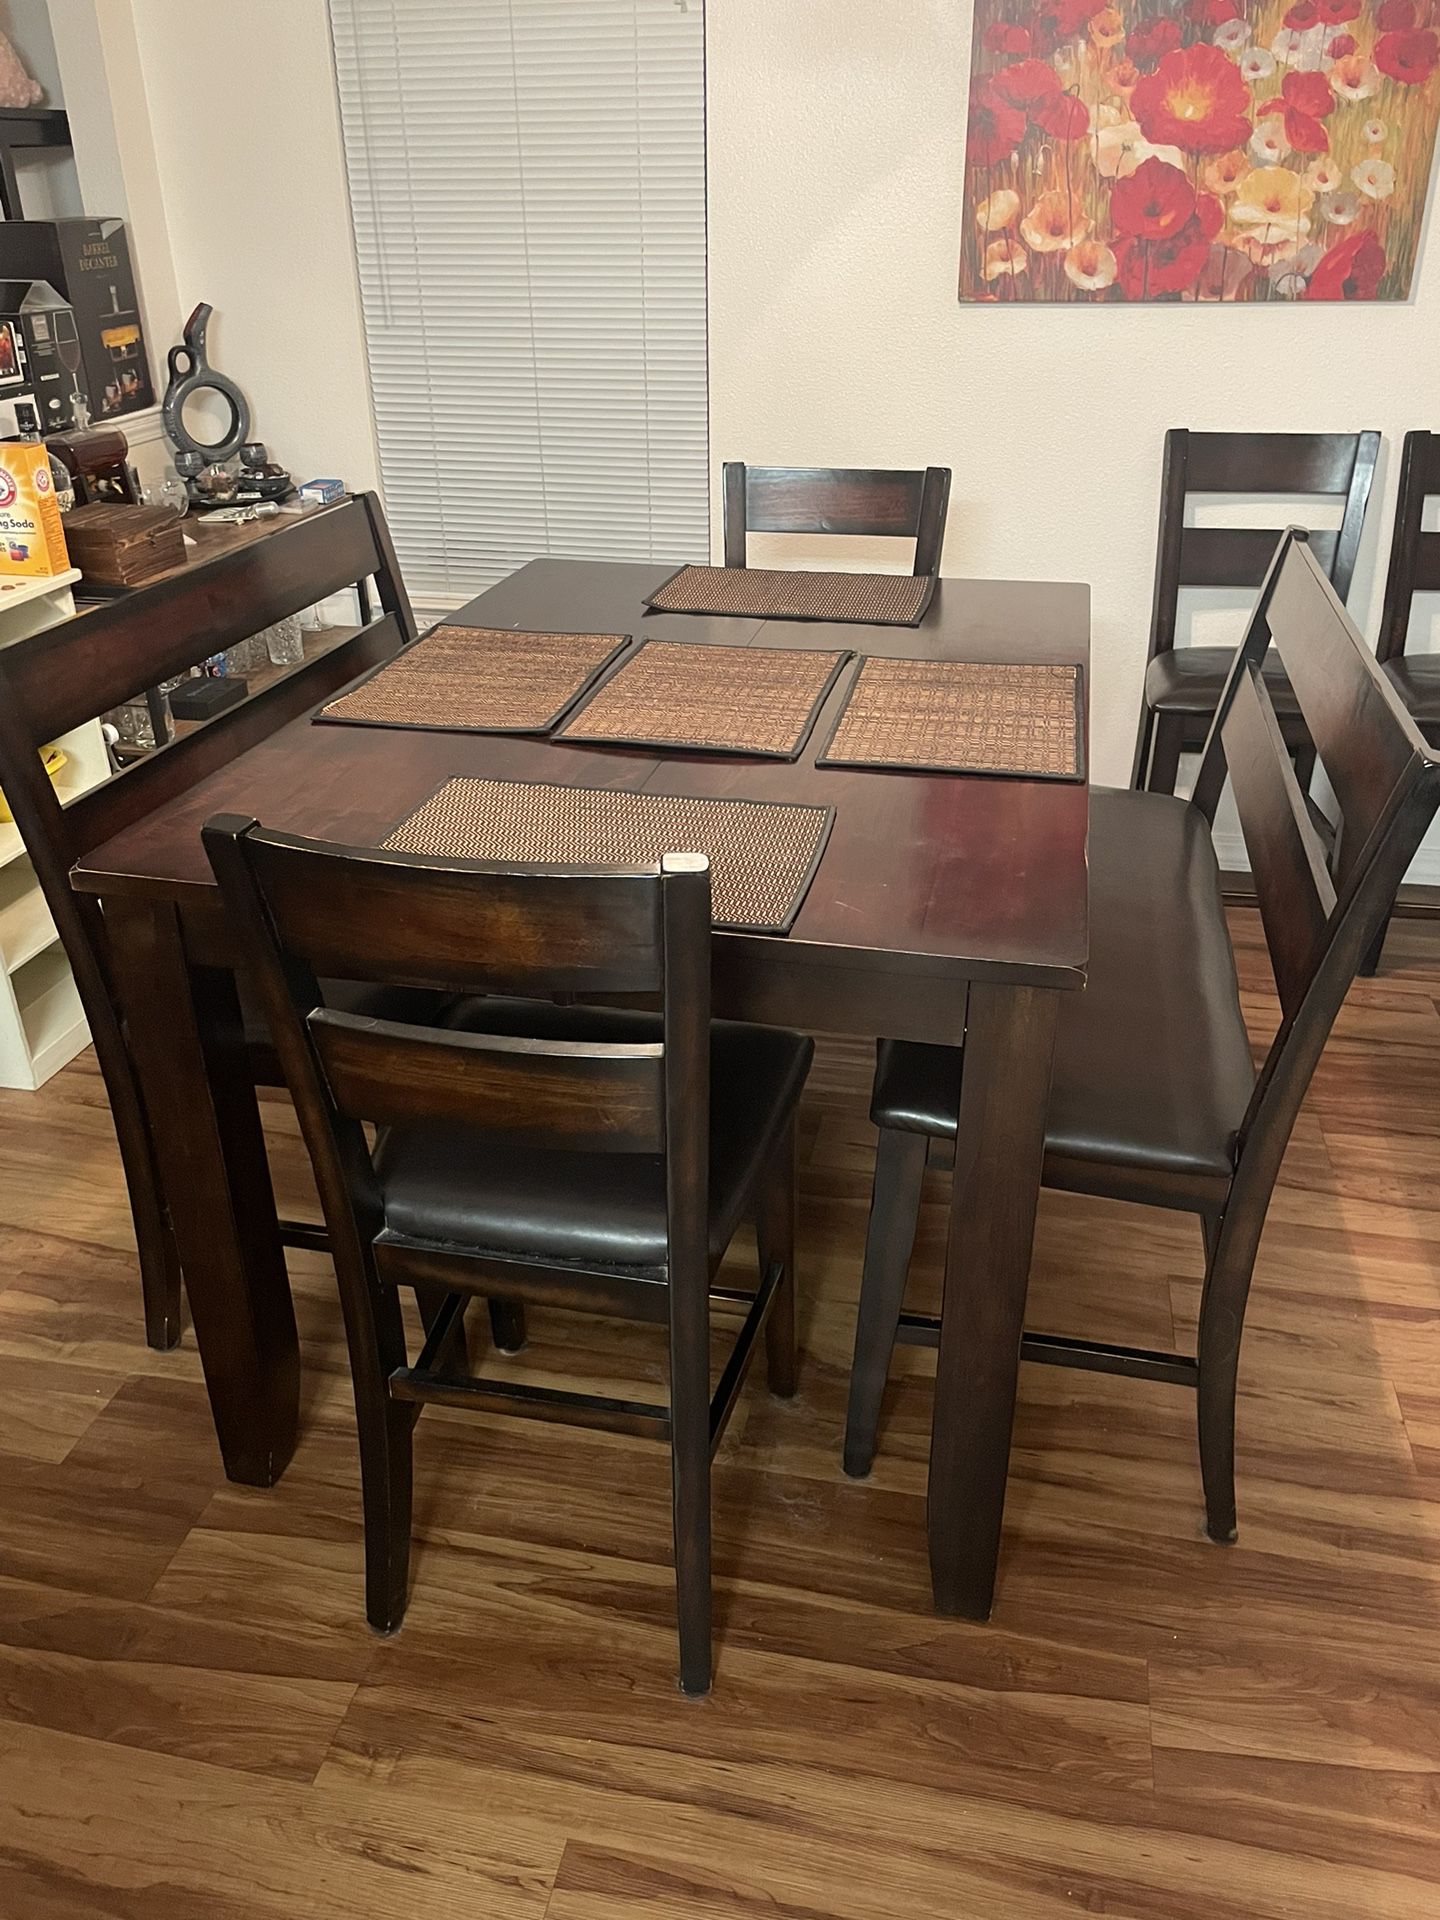 Solid Cherry Wood Kitchen Table